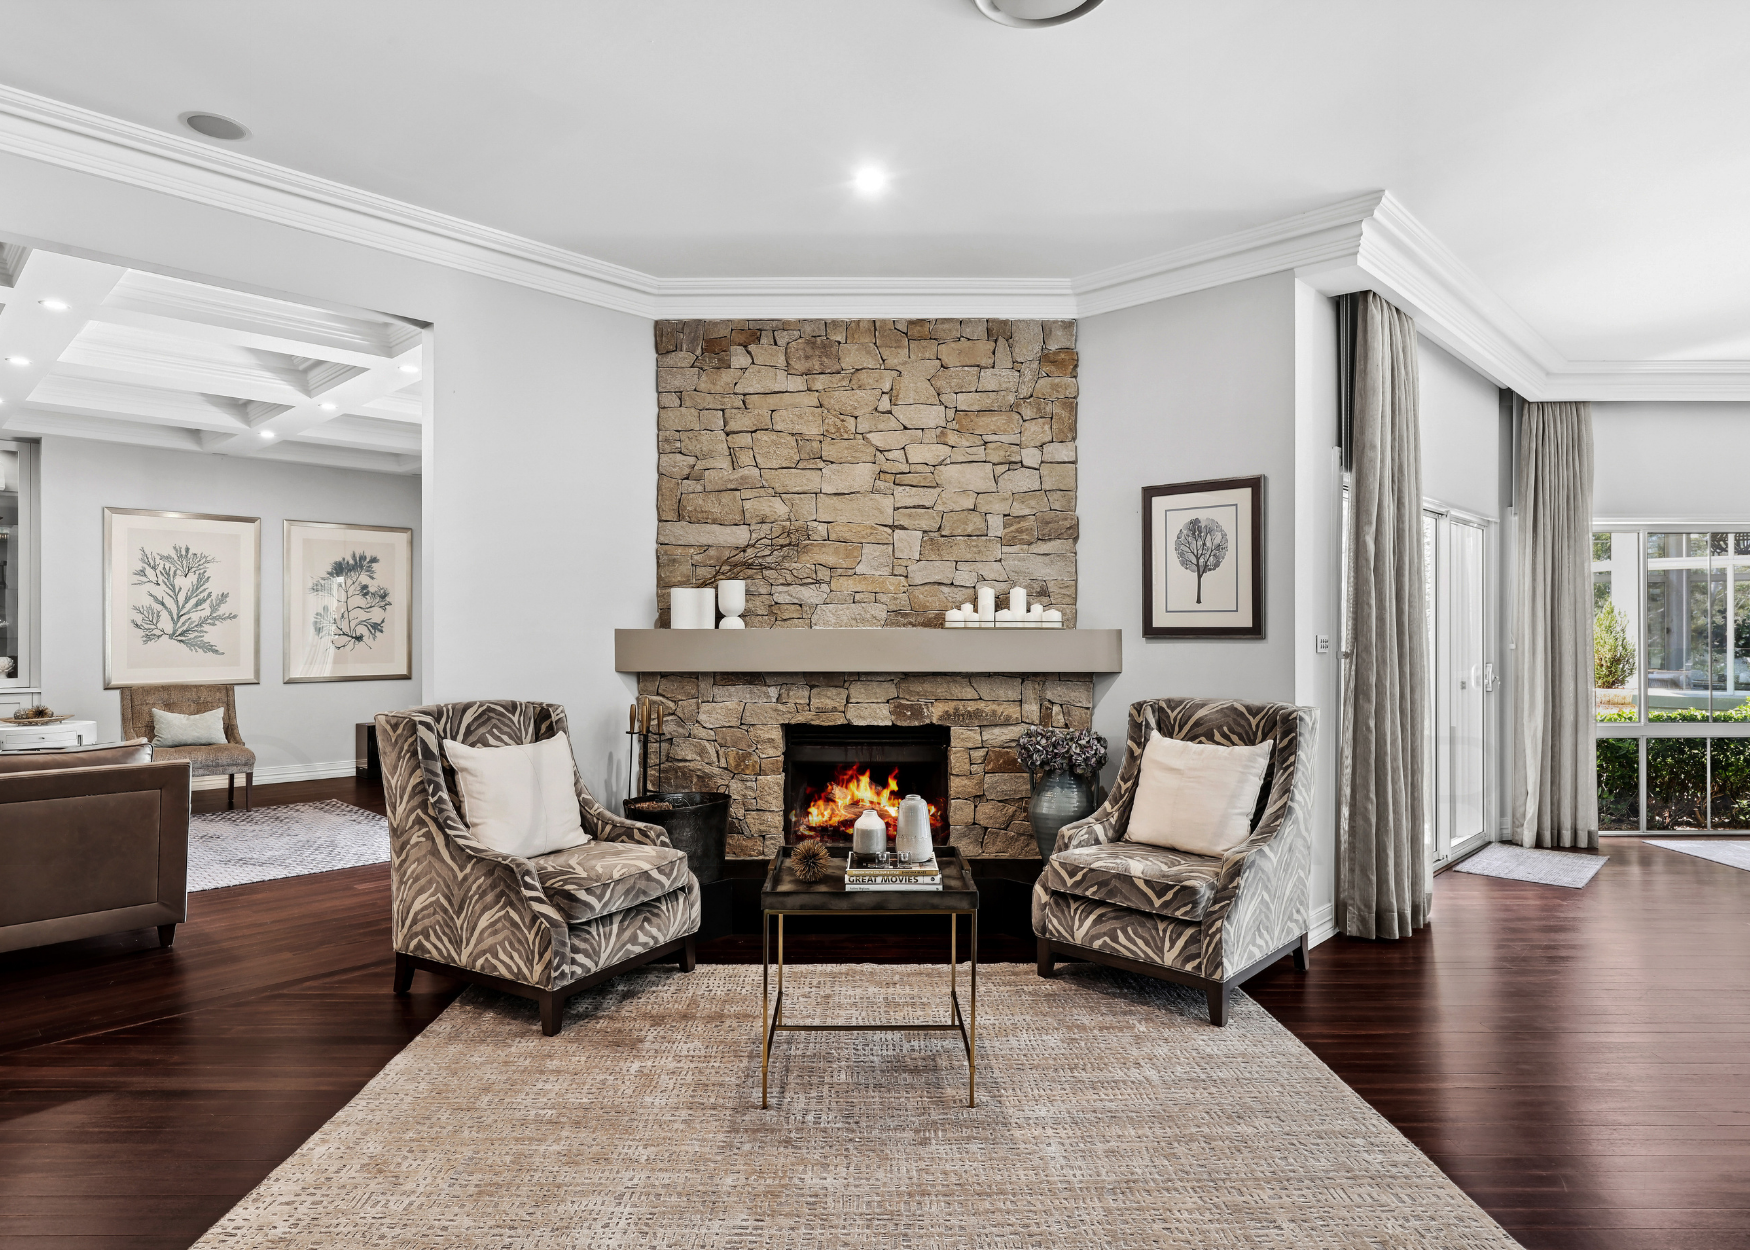 Carters Road, Dural fireplace